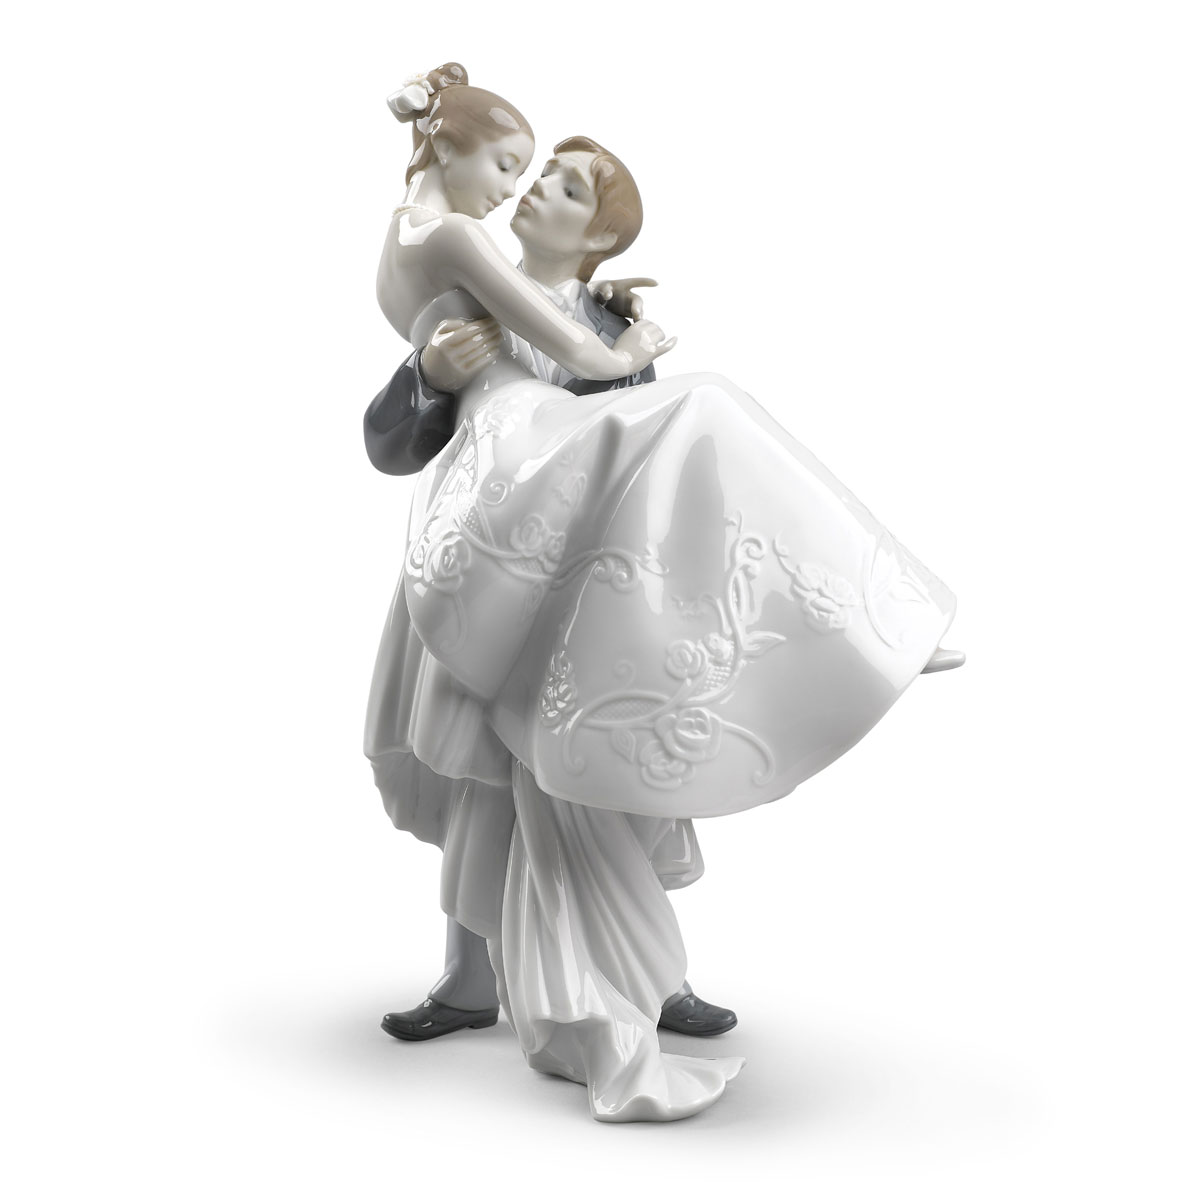 Lladro Classic Sculpture, The Happiest Day Couple Figurine Type 356